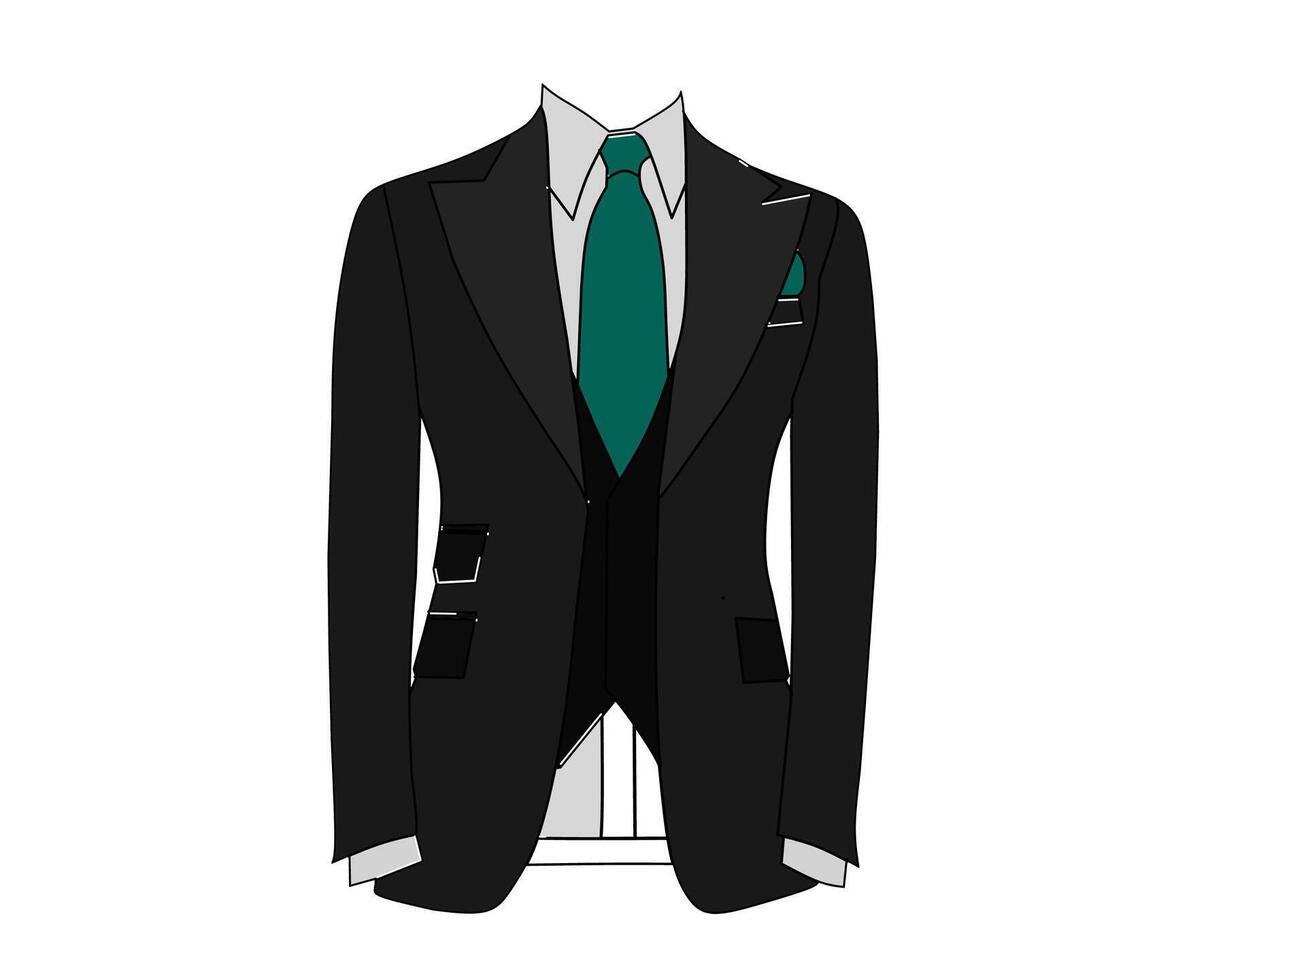 Vector illustration of black color tuxedo formal wear with green tie. Business background themed formal wear concept.